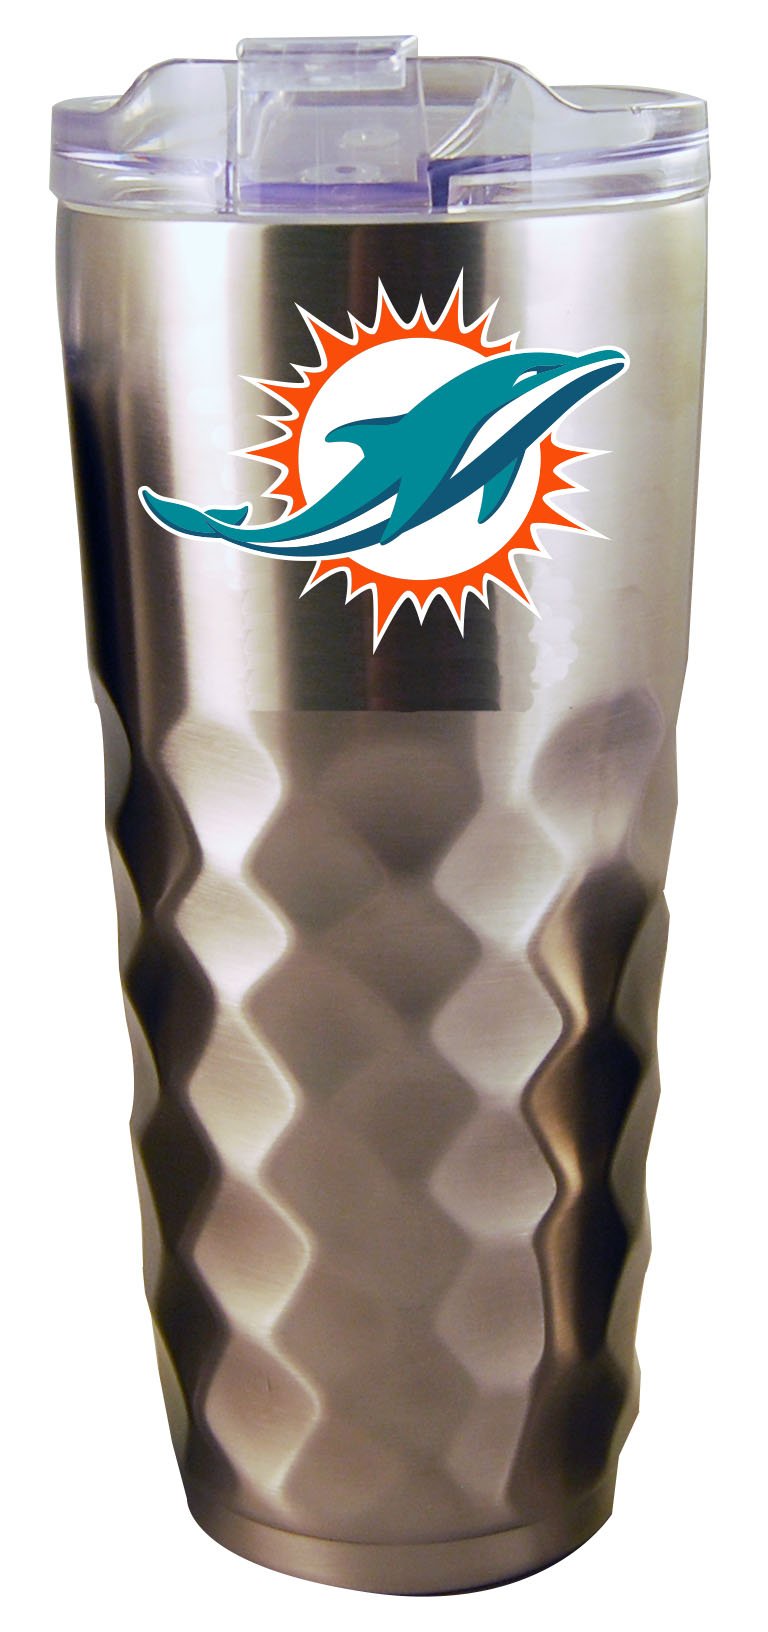 32OZ SS DIAMD TMBLR DOLPHINS
CurrentProduct, Drinkware_category_All, MIA, Miami Dolphins, NFL
The Memory Company